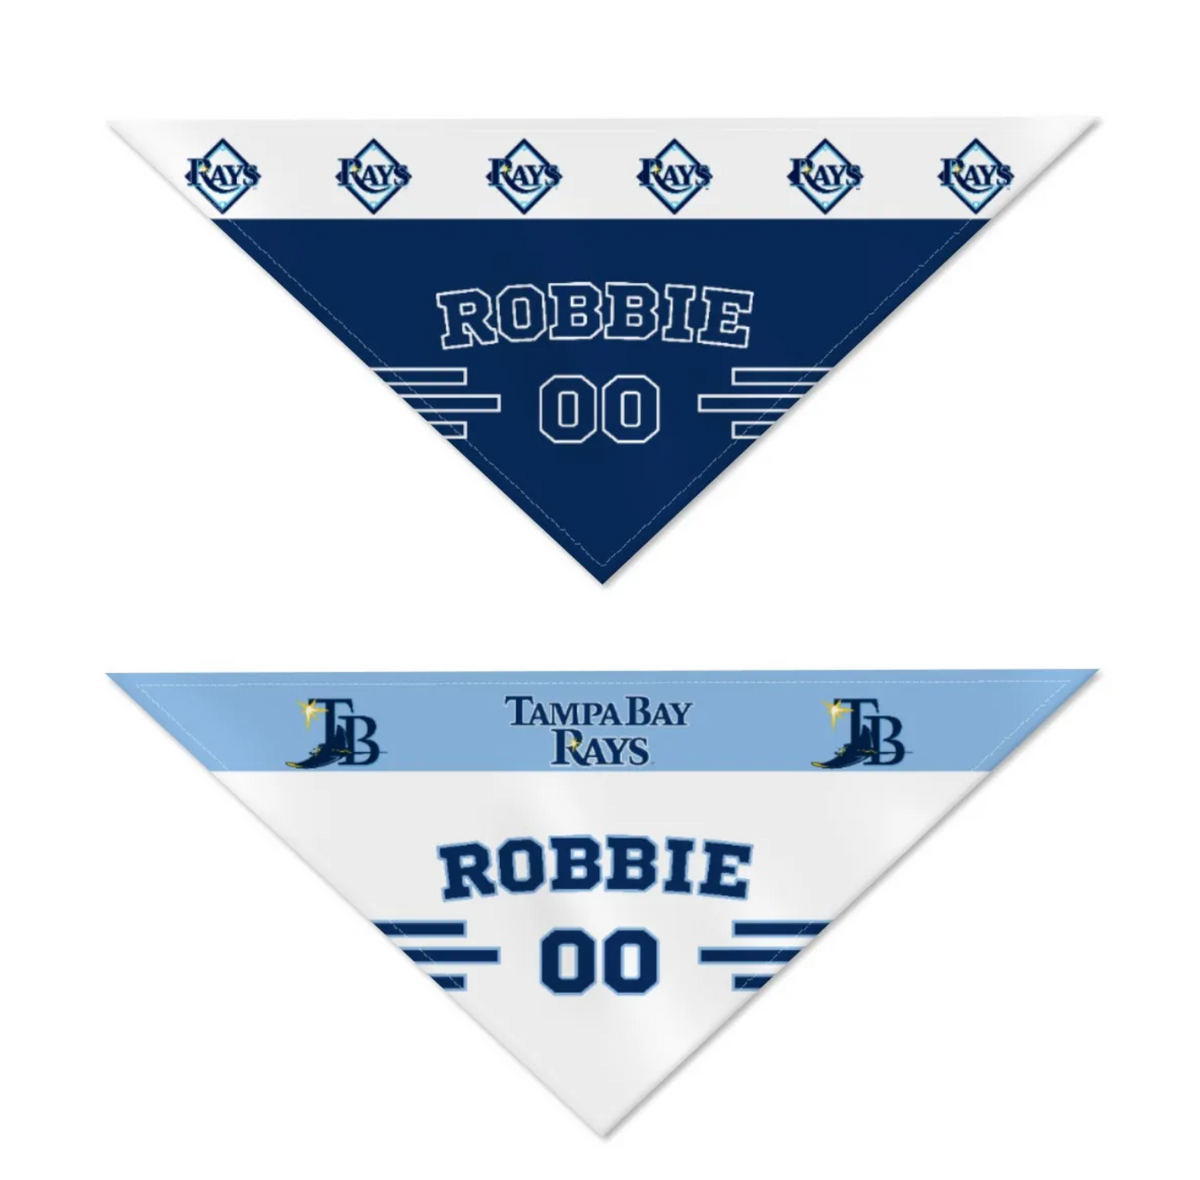 Tampa Bay Rays Home/Road Personalized Reversible Bandana - 3 Red Rovers